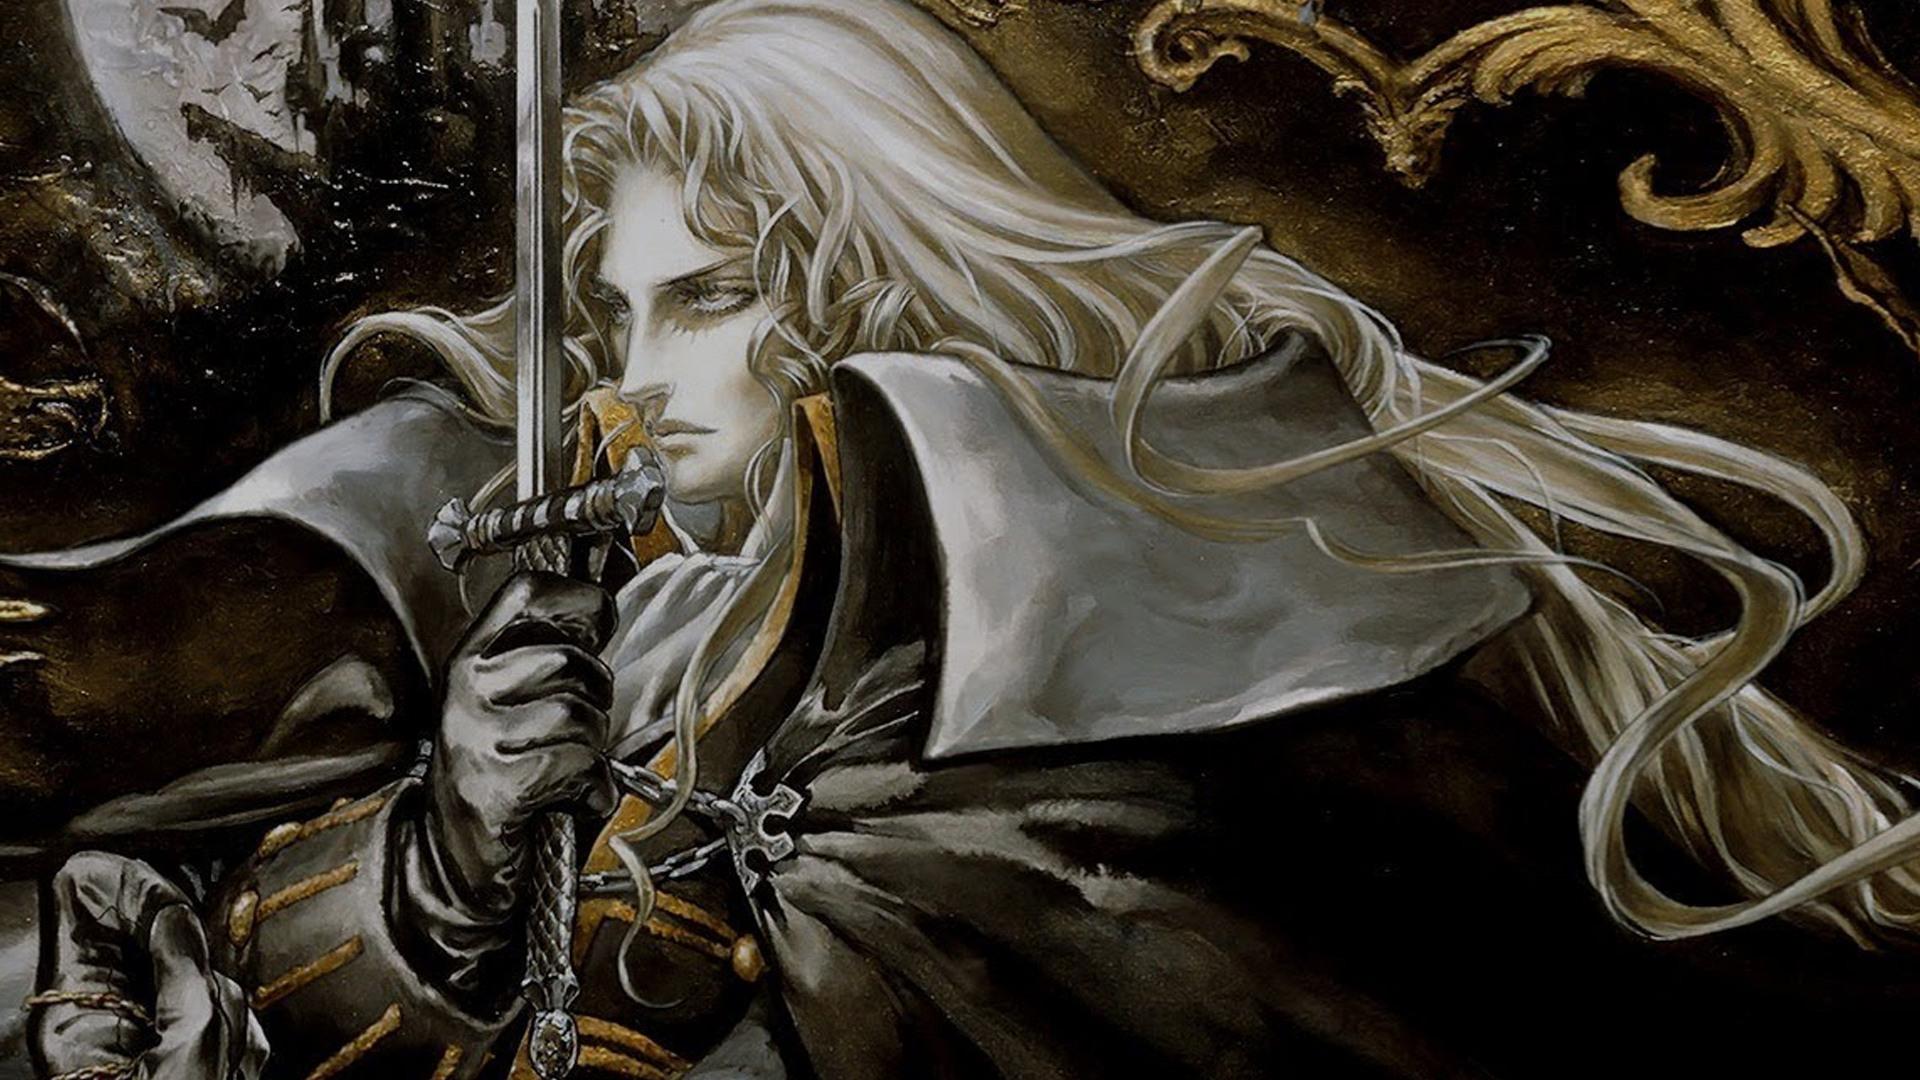 Review: Castlevania: Symphony of the Night